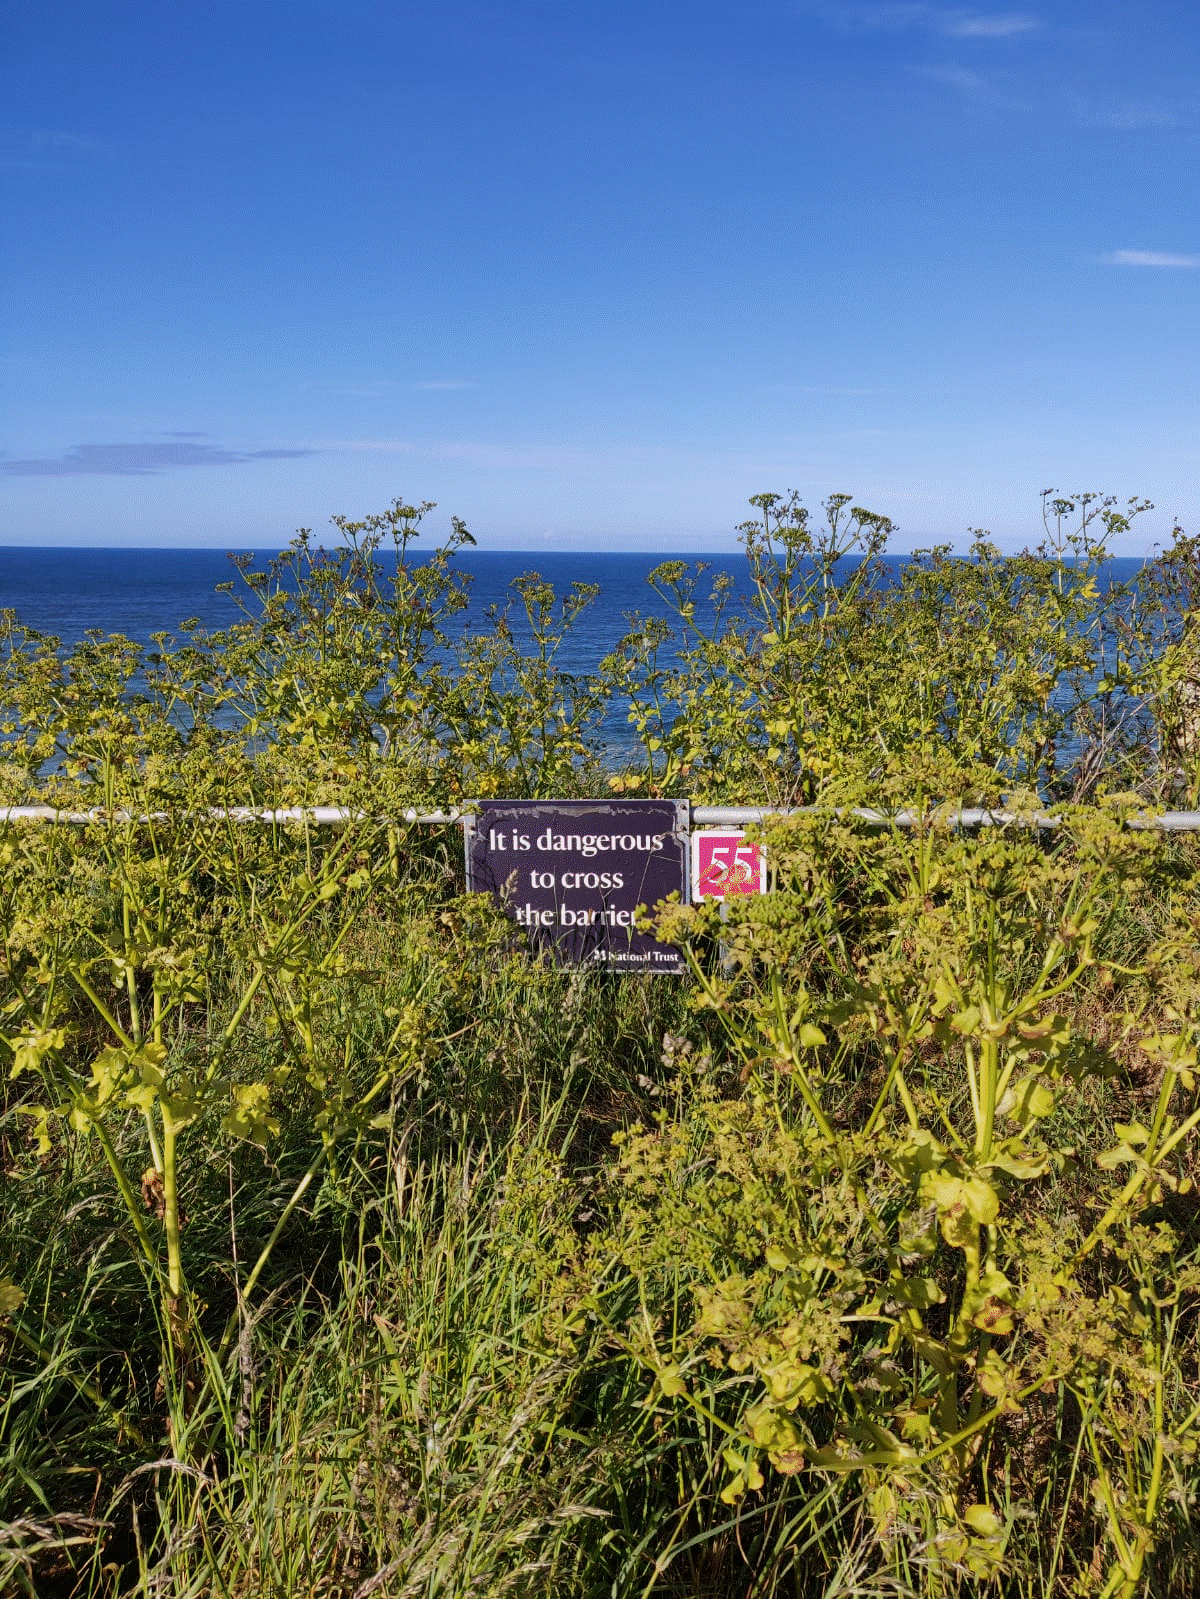 national trust sign and metal barrier. Sign says 'it is dangerous to walk along the cliffs.'